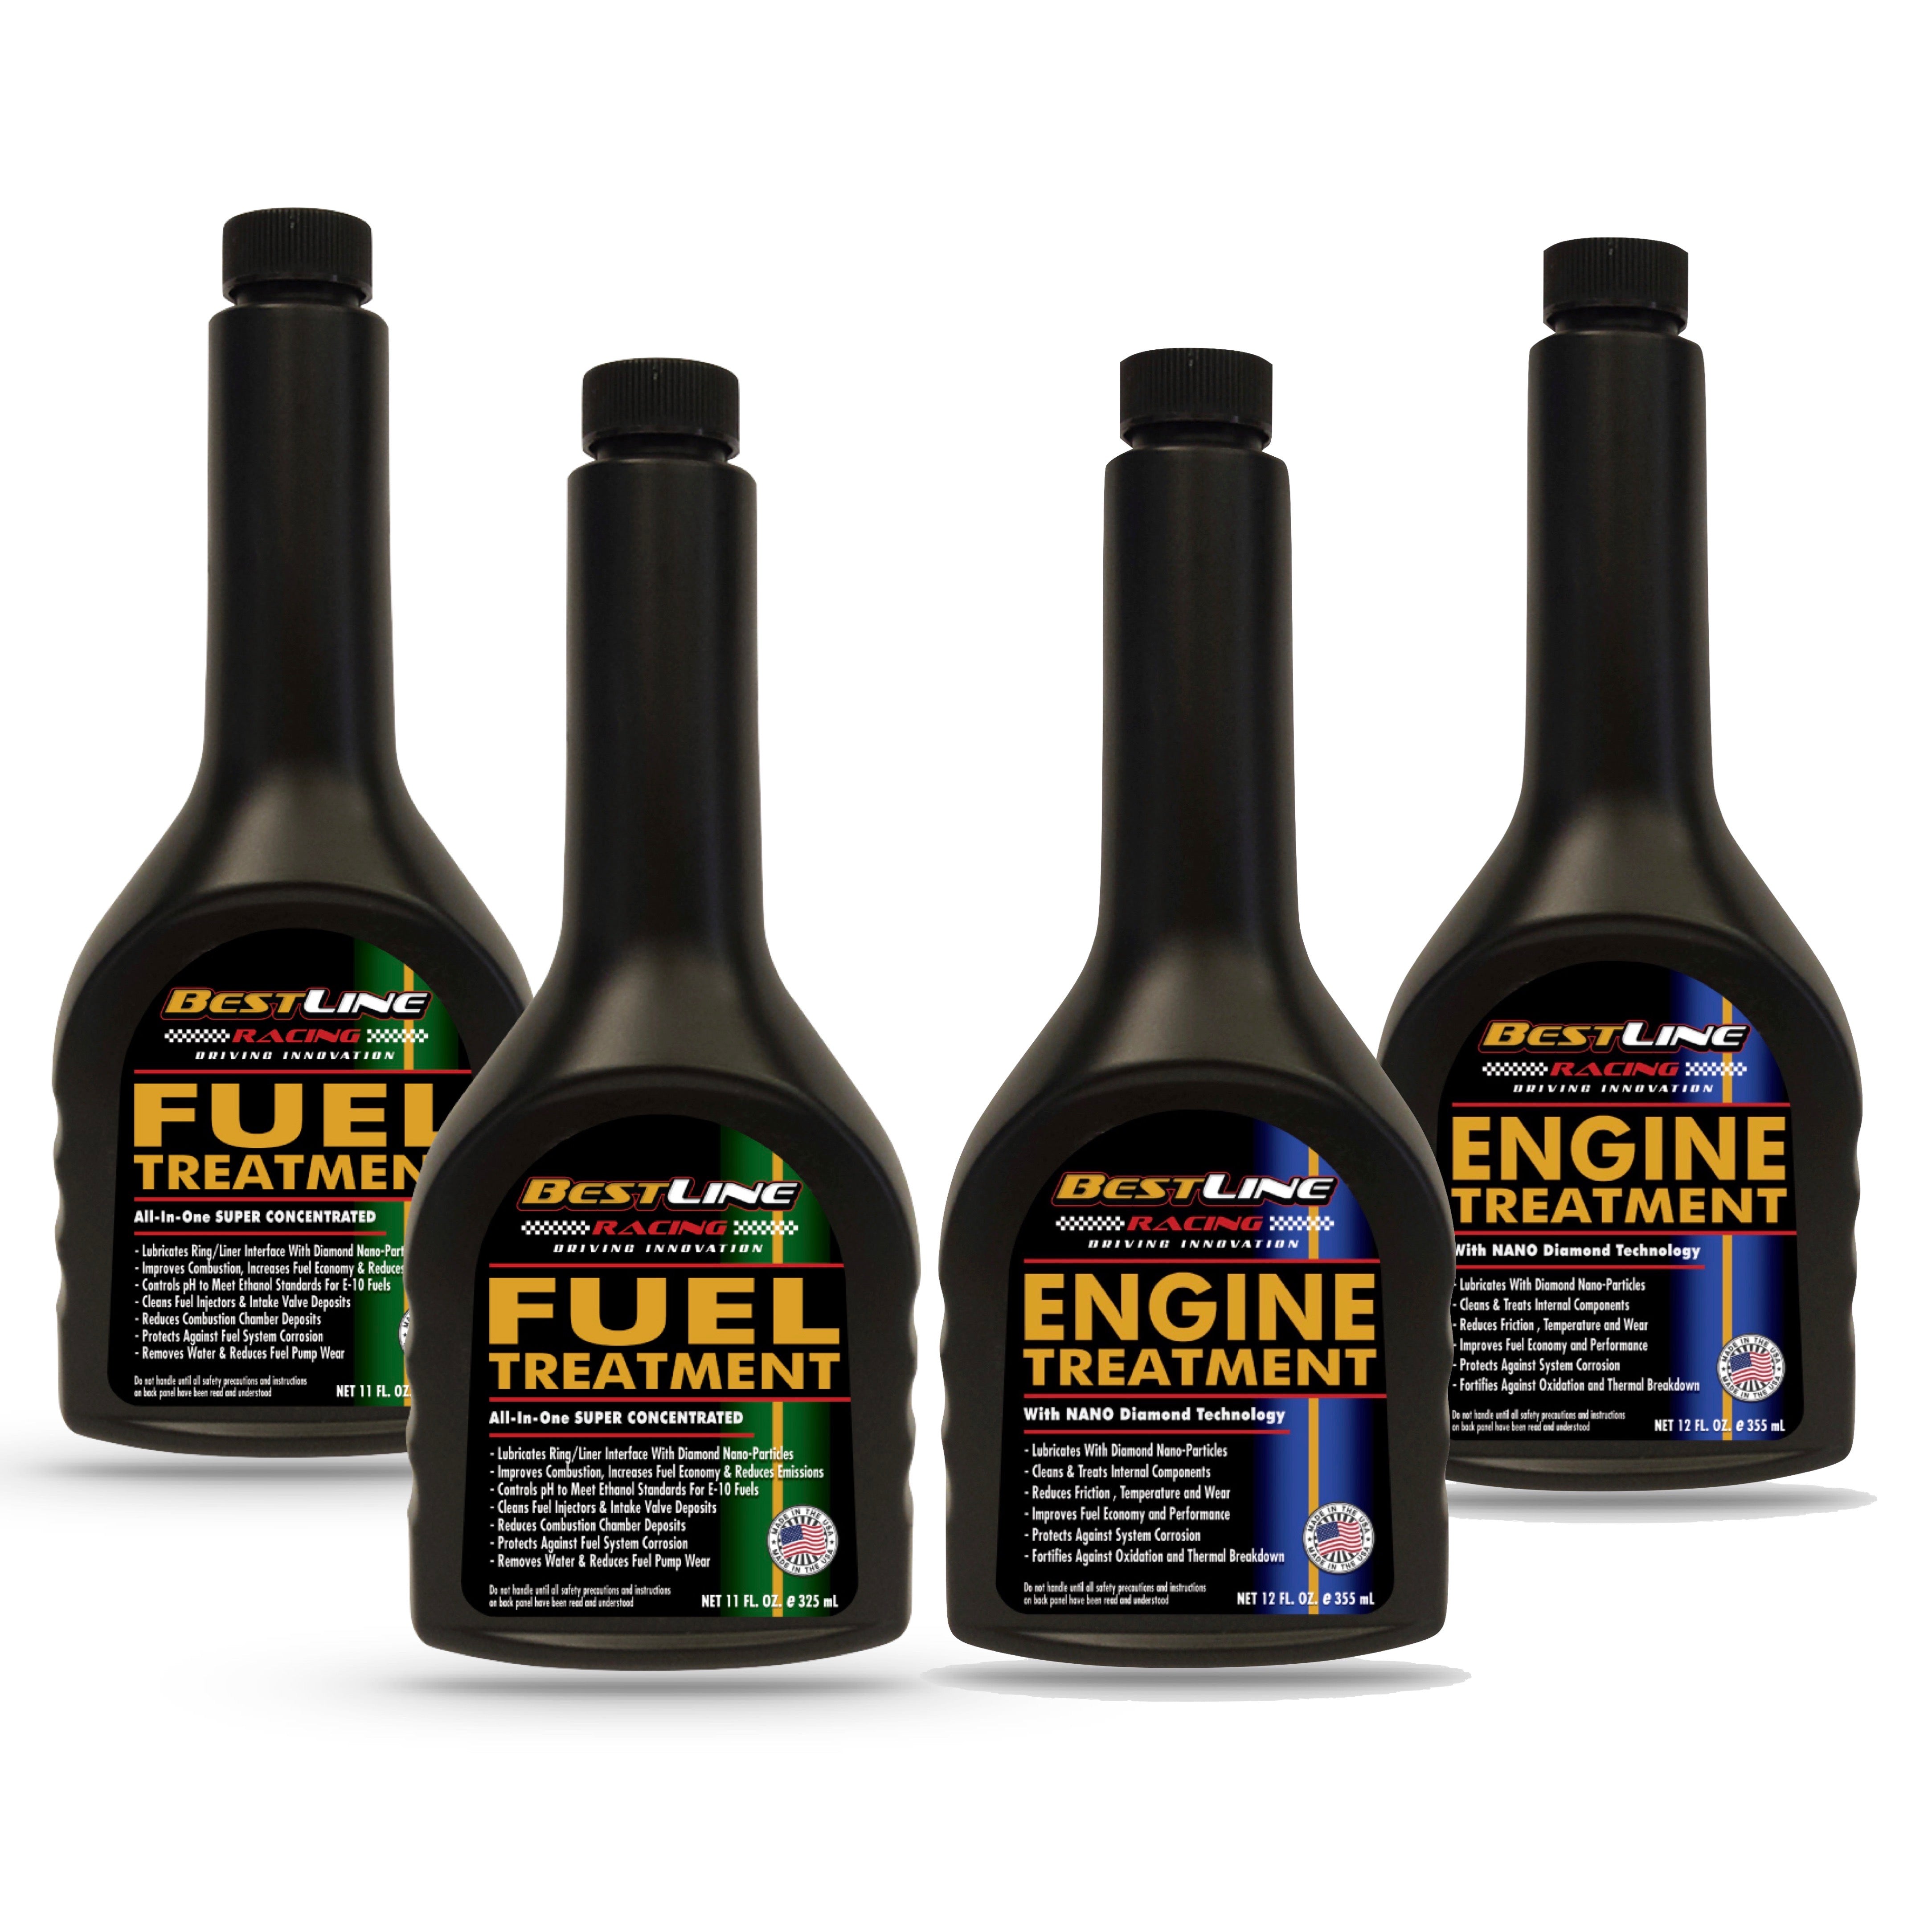 Engine oil and fuel treatments